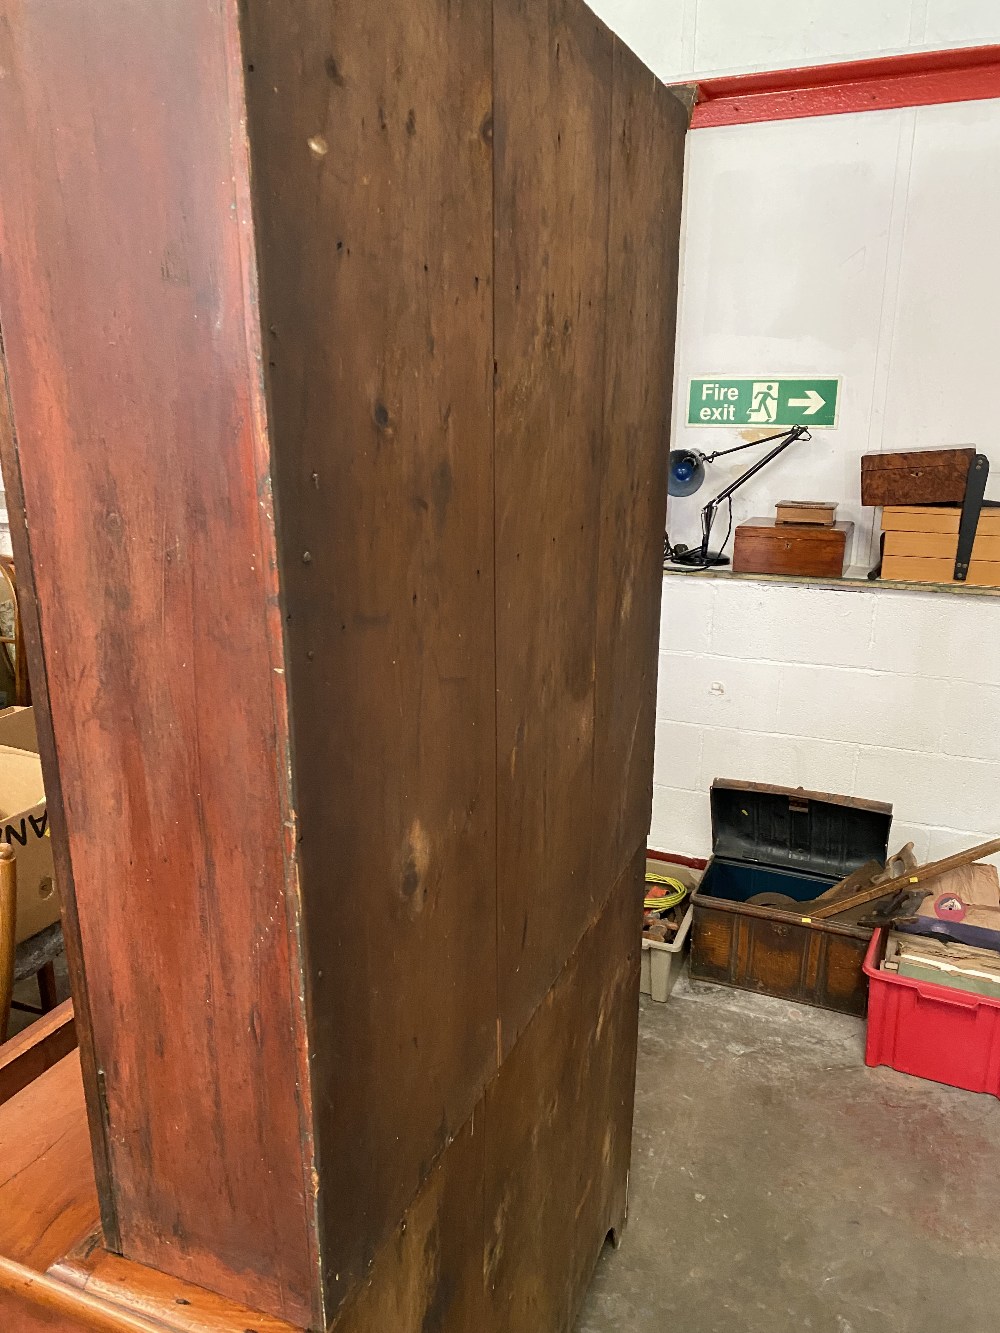 ANTIQUE MAHOGANY BOOKCASE CUPBOARD or 'Cwpwrdd Gwydr', having a base section with turned pillars and - Image 7 of 7